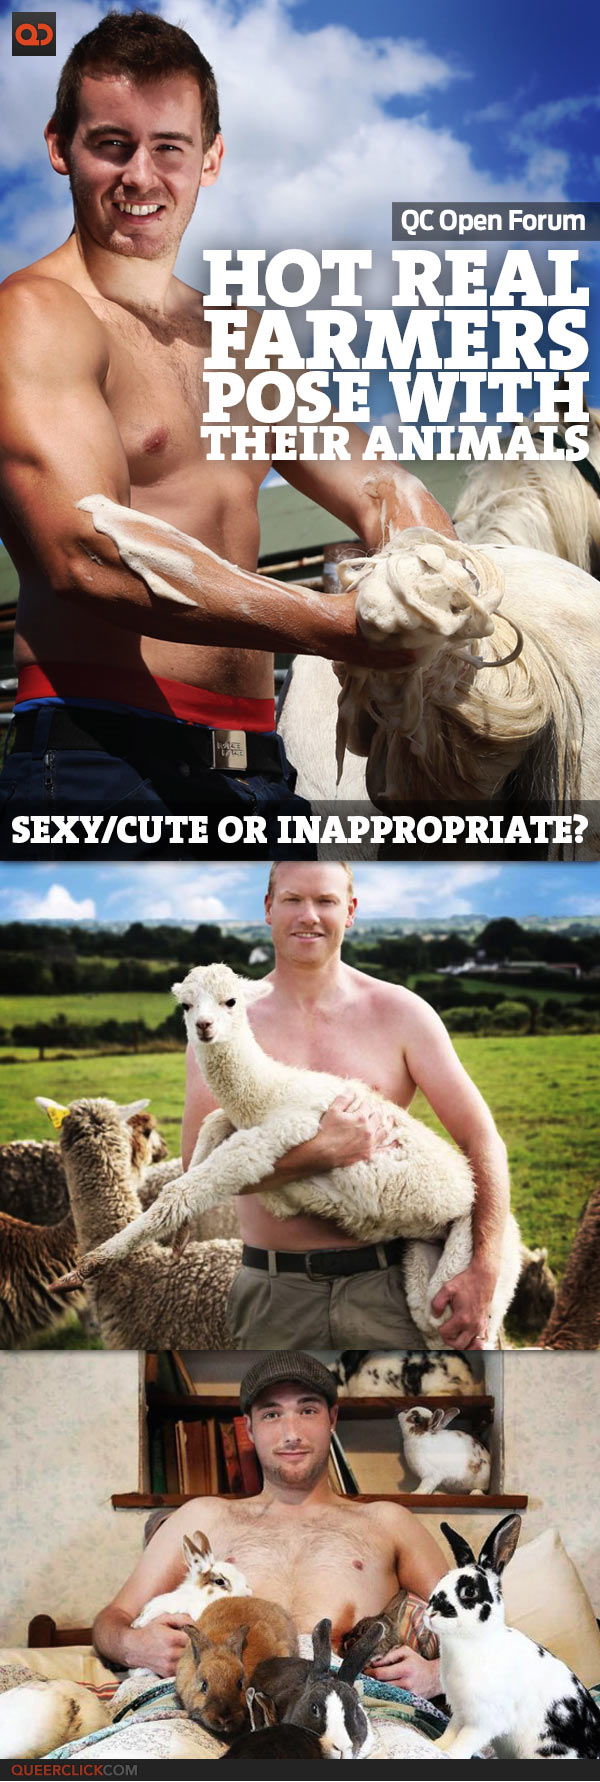 QC Open Forum: Hot Real Farmers Pose With Their Animals - Sexy/Cute Or Inappropriate?